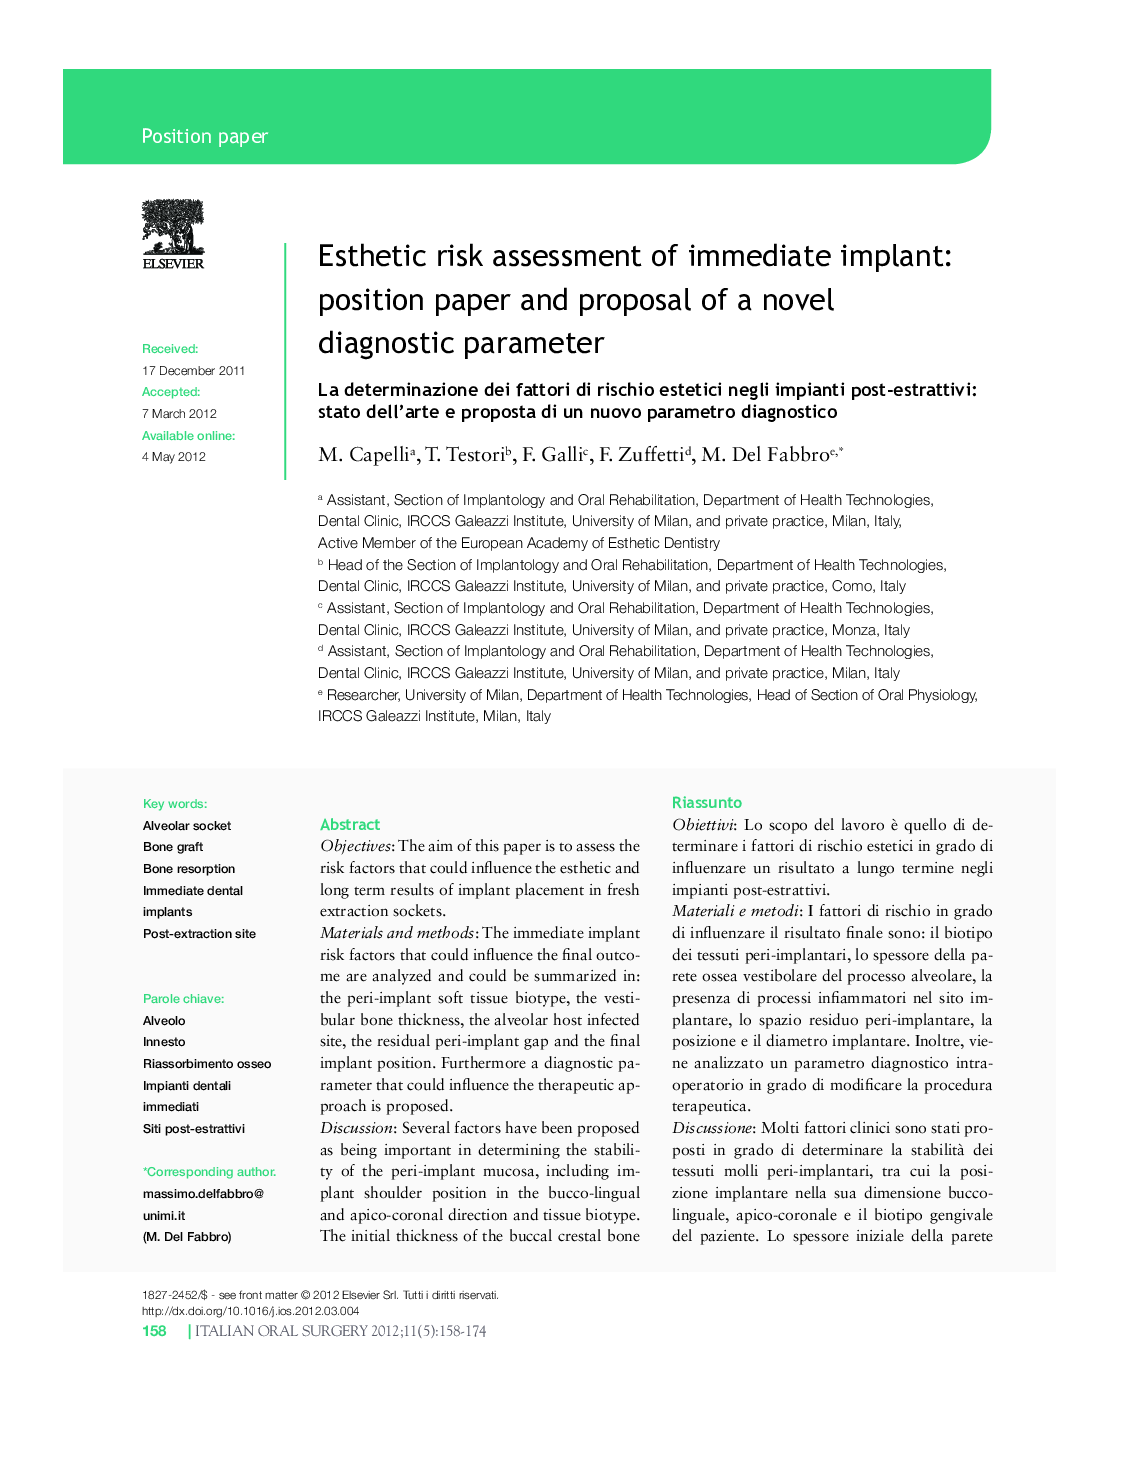 Esthetic risk assessment of immediate implant: position paper and proposal of a novel diagnostic parameter